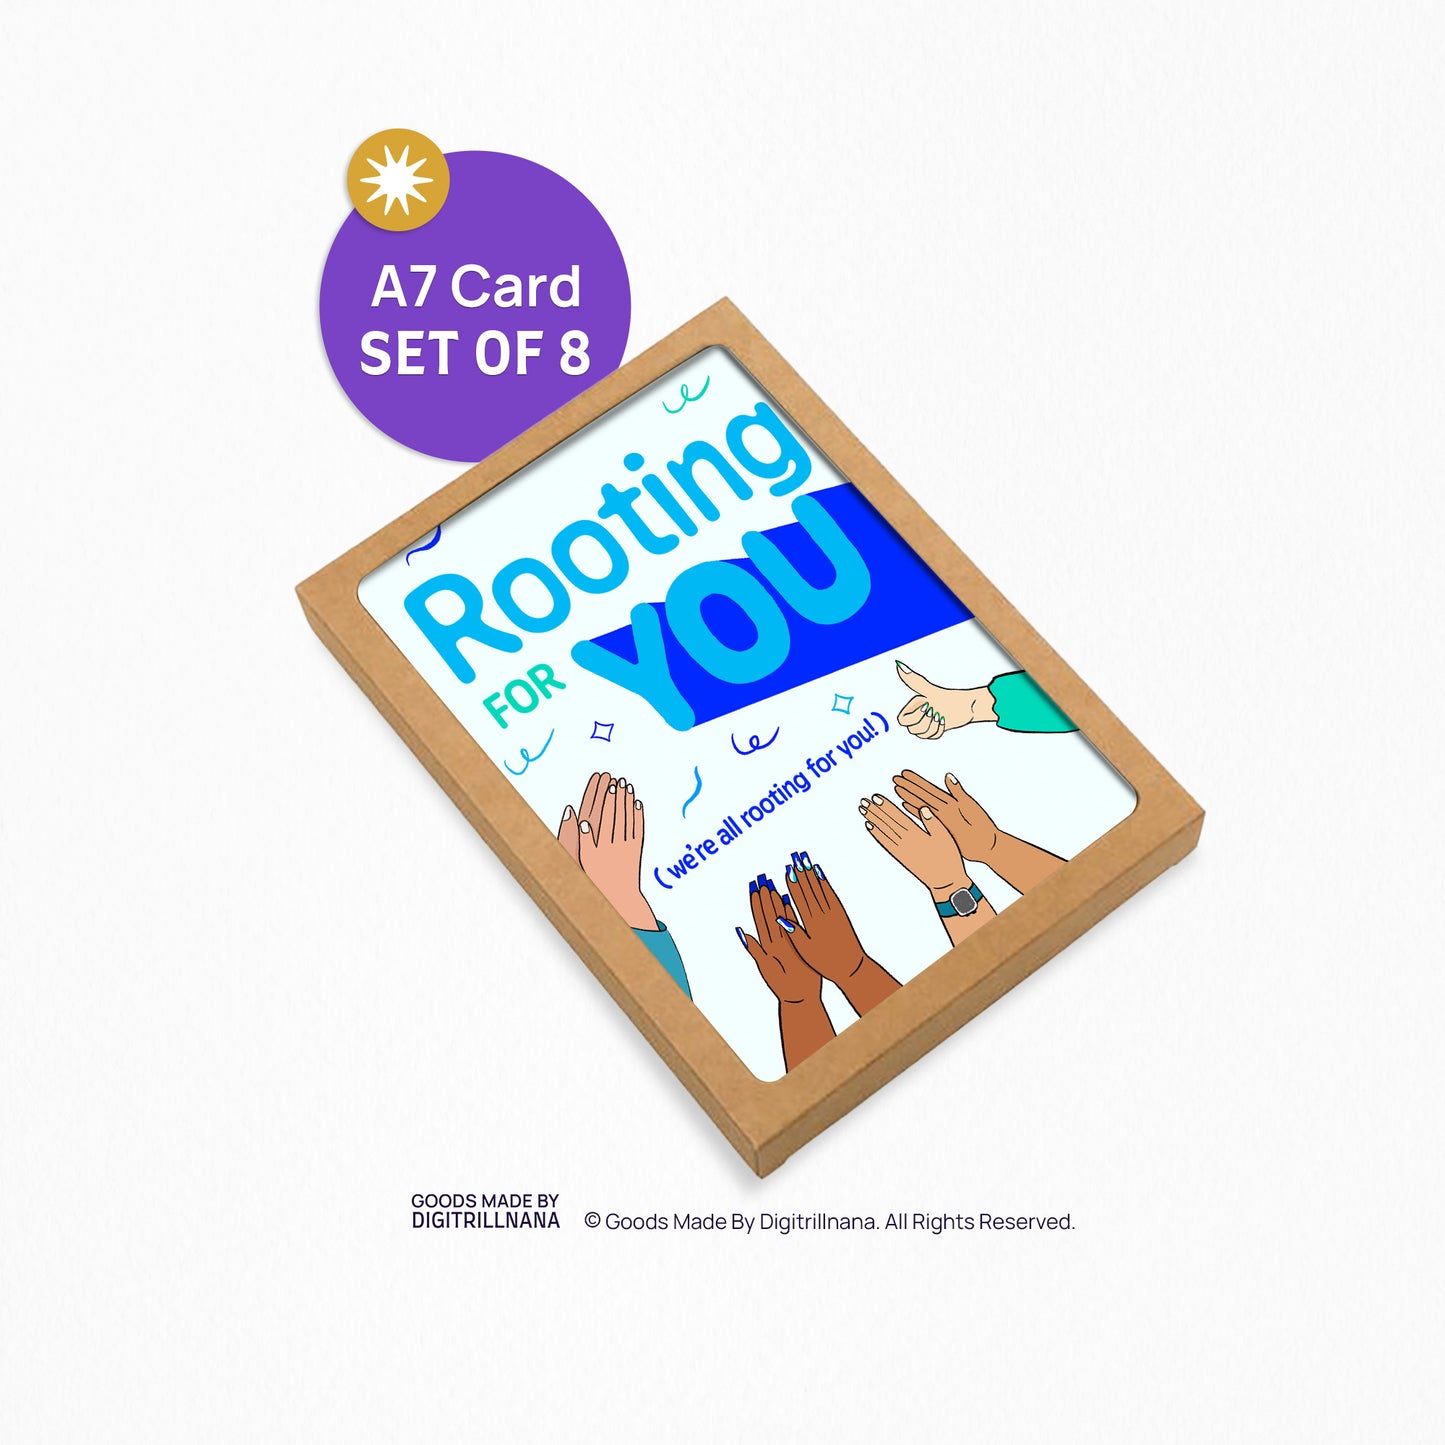 Rooting For You 5x7”, Encouraging, celebrate, congratulations, achievement, big opportunity, greeting cards from Goods Made By Digitrillnana, Ashley Fletcher. Black Woman Owned. Perfect card to cheer on or celebrate a friend!